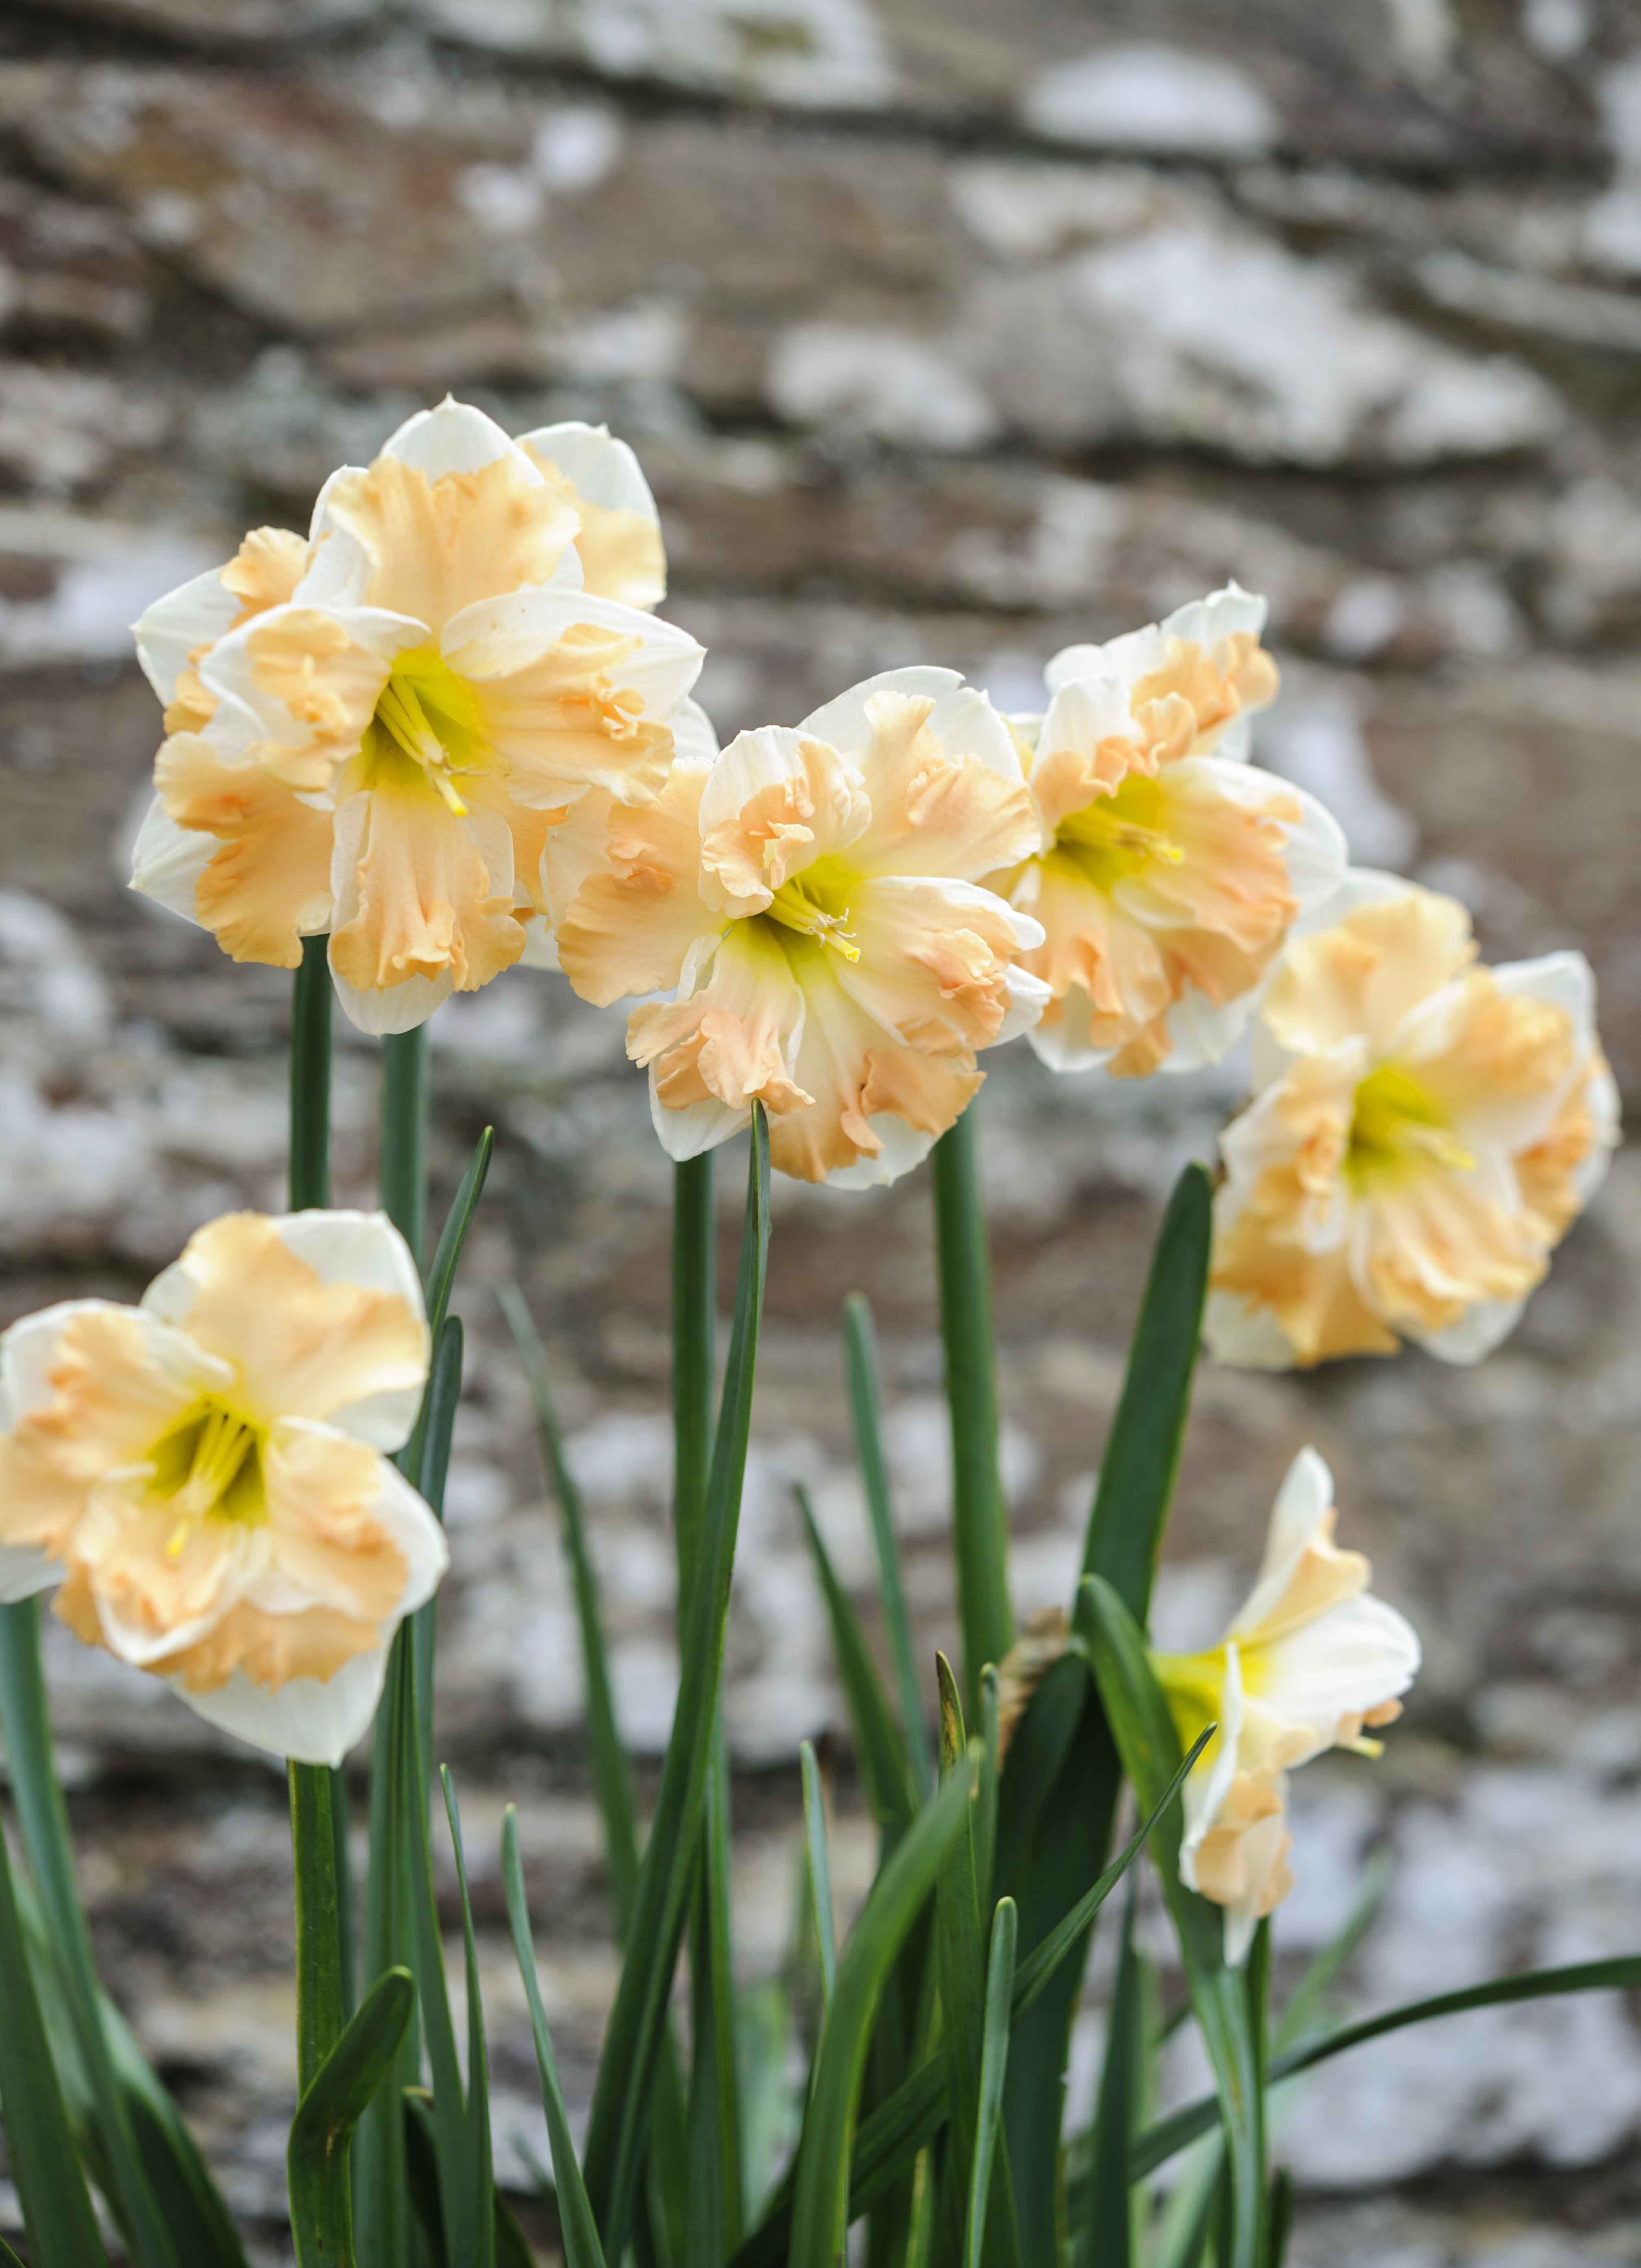 Narcissus 'Cum Laude' | Daffodils, Gardens and Plants